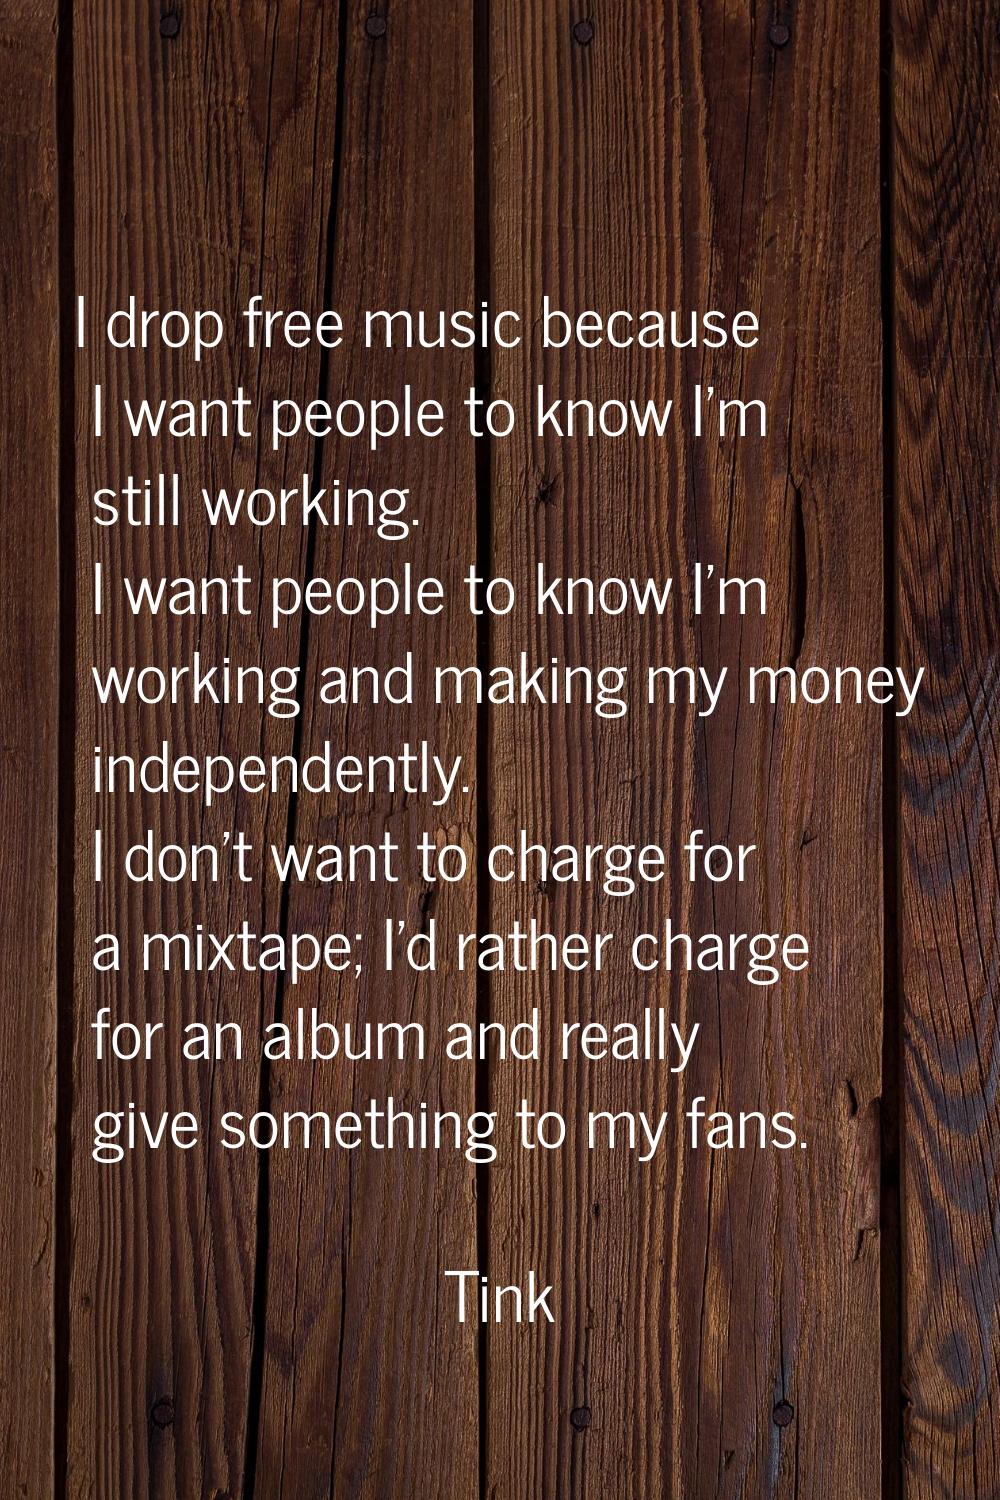 I drop free music because I want people to know I'm still working. I want people to know I'm workin